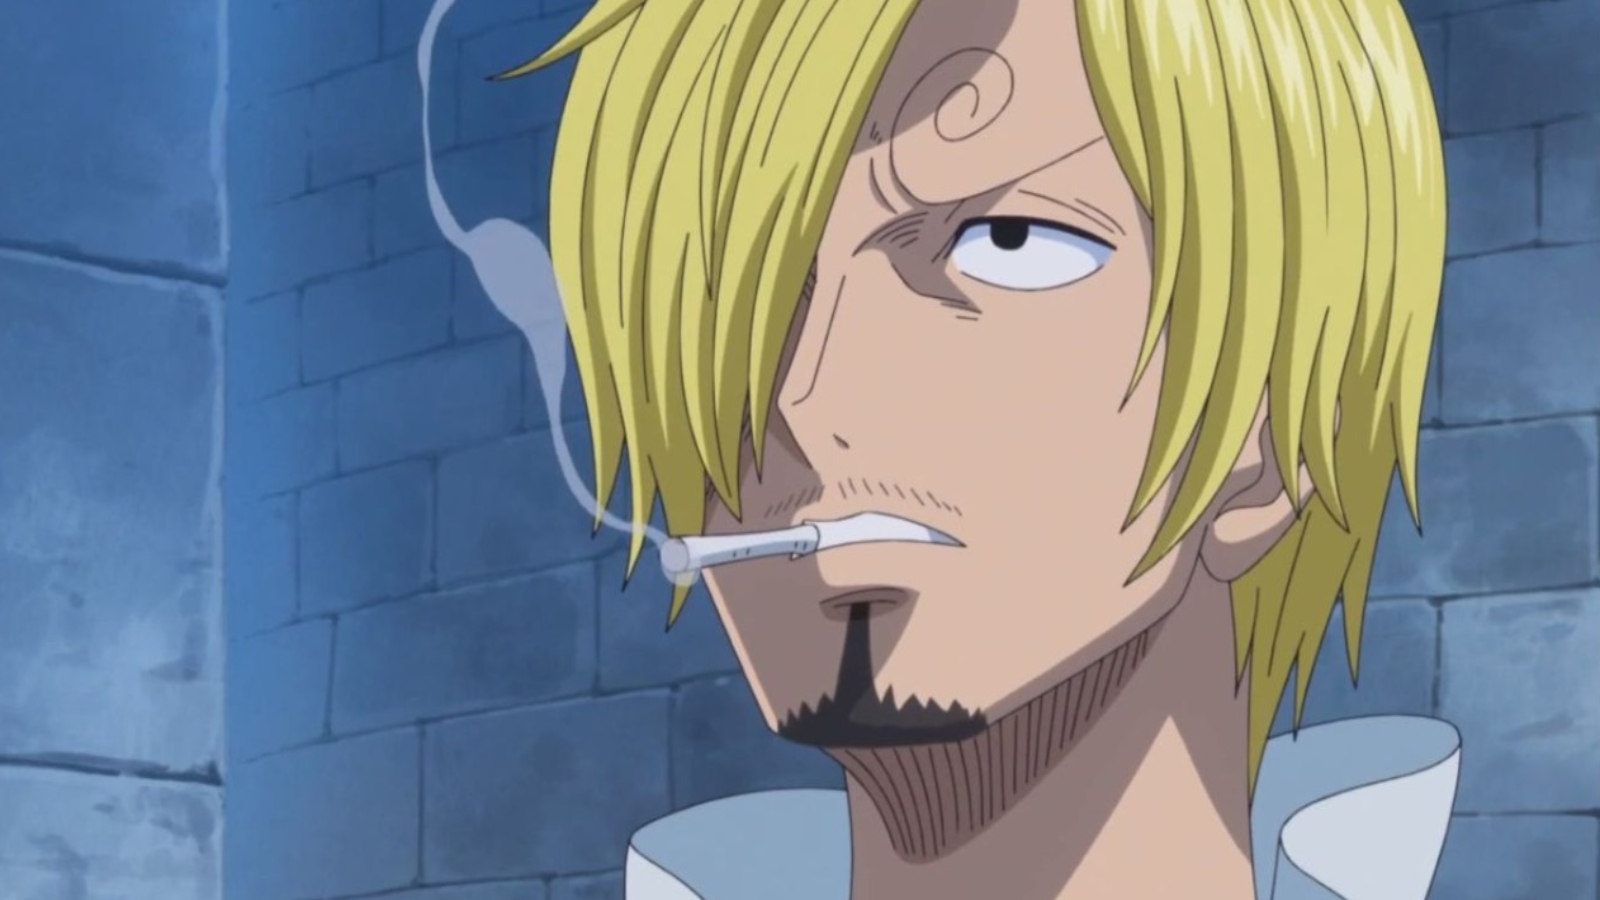 Sanji from One Piece smoking a cigarette